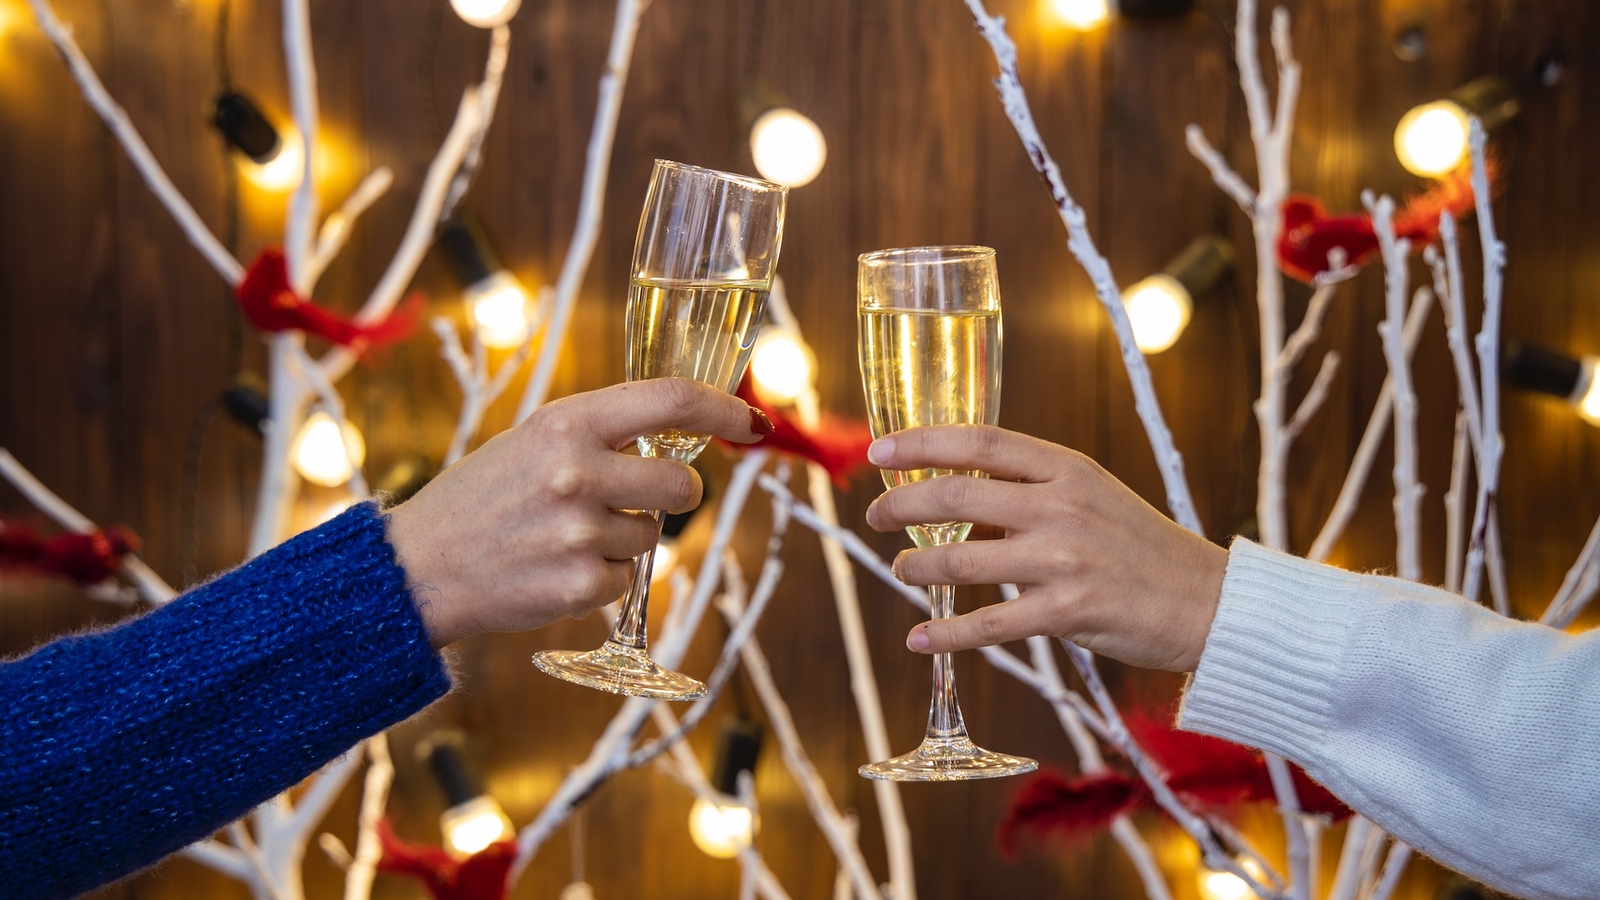 Toasting new year with prosecco